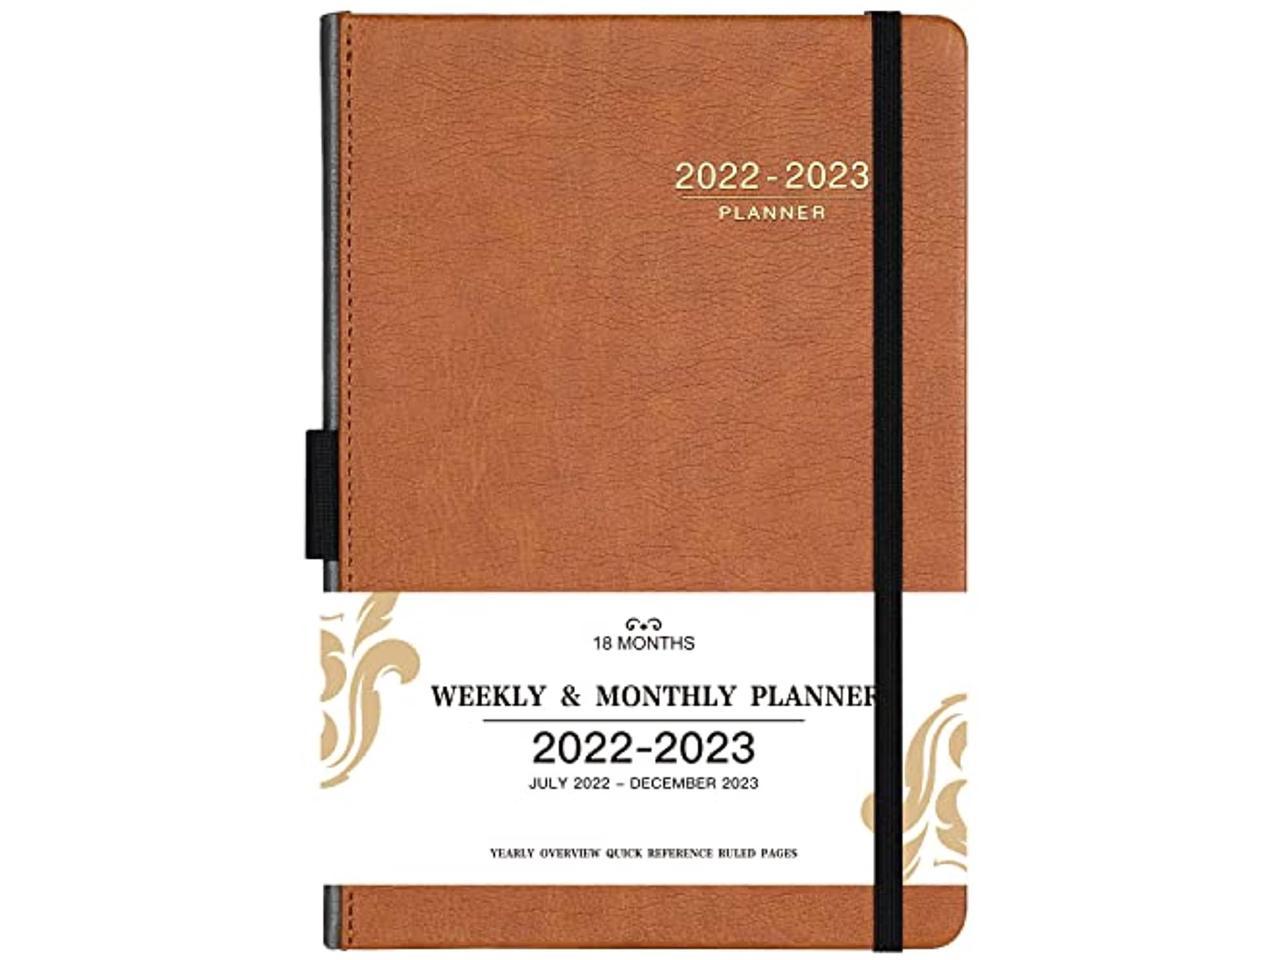 24 Ruled pages Elastic Closure December 2023 Pen Holder 6.4'' x 8.5'' Planner 2022-2023 with Leather Cover 2022-2023 Planner 2022-2023 Weekly Monthly Planner July 2022 